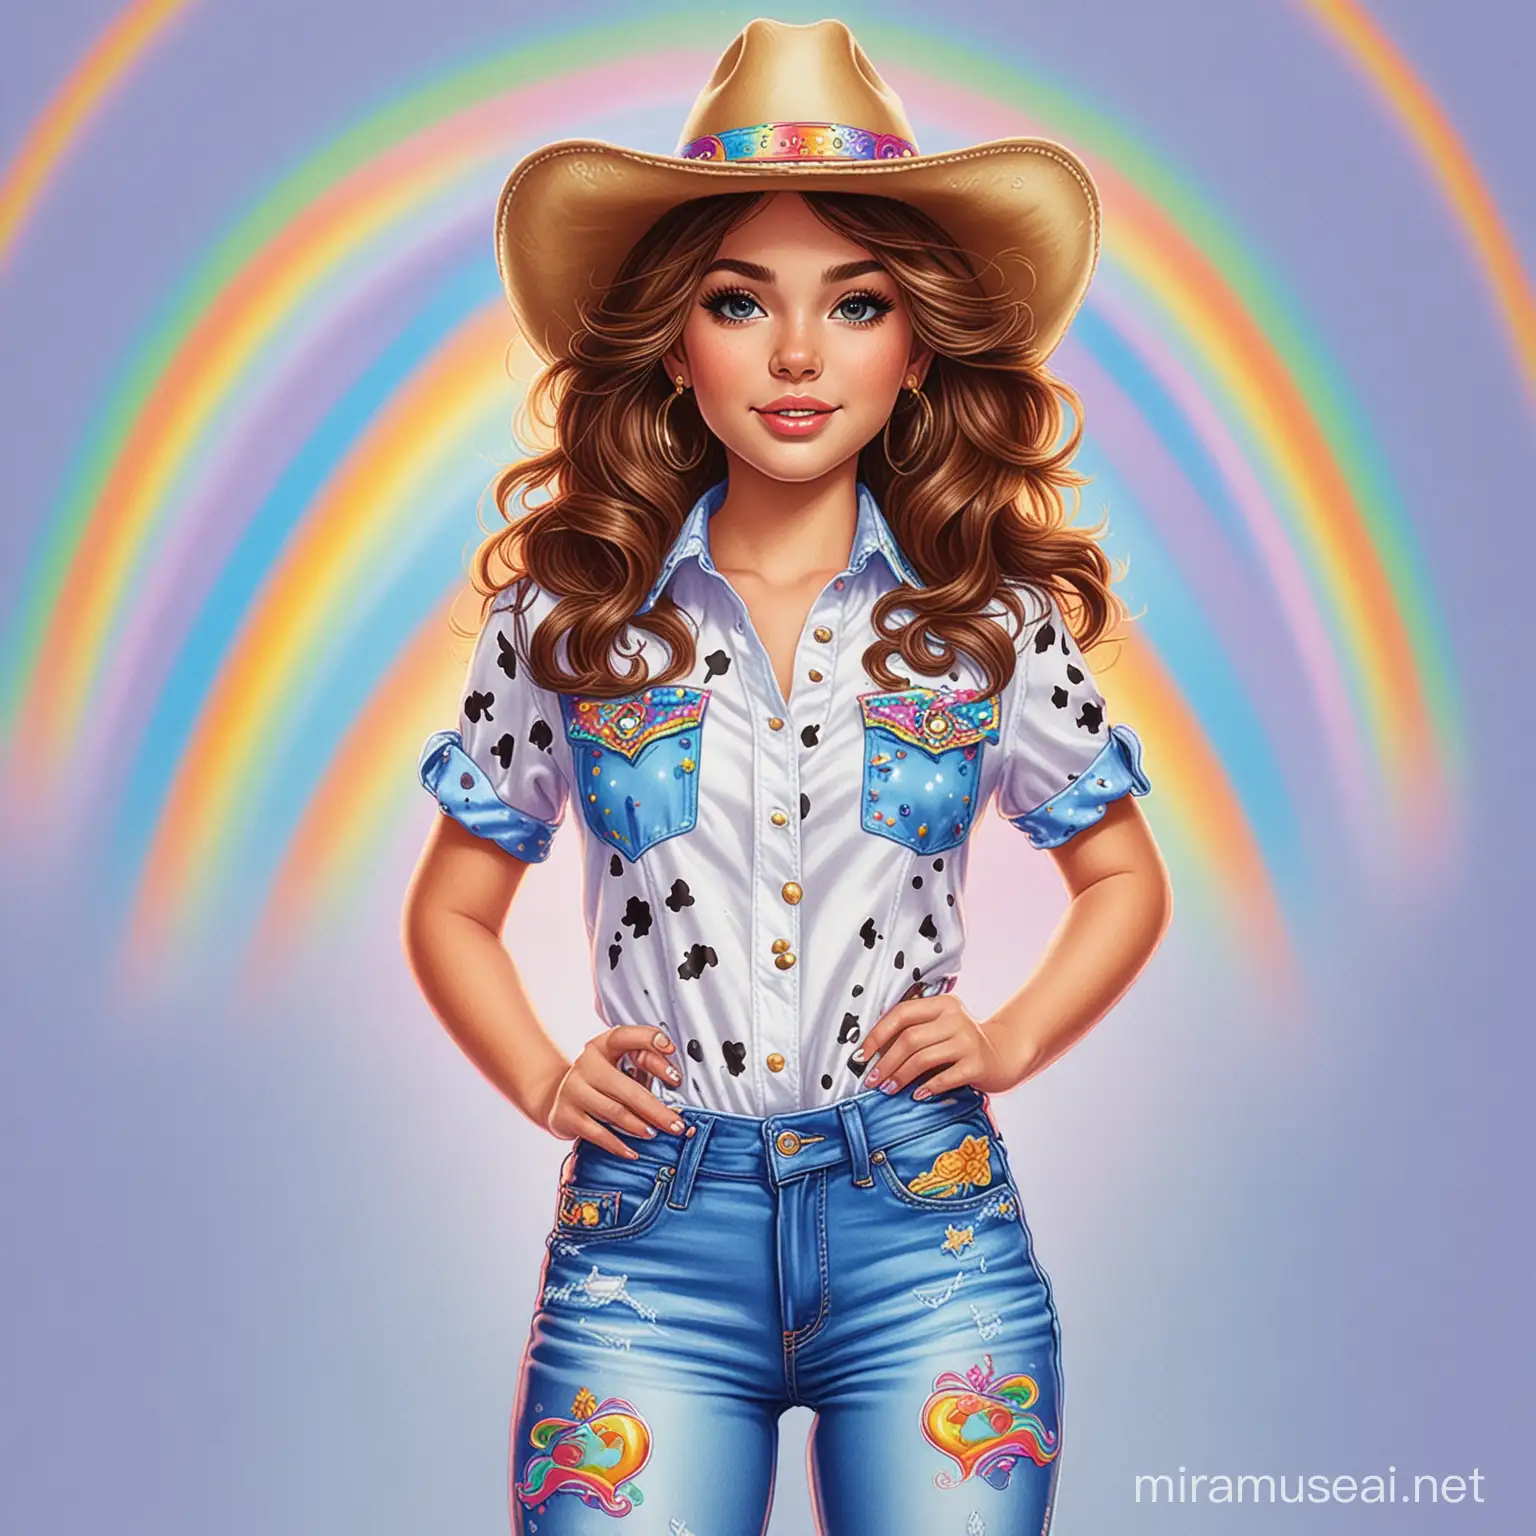 Whimsical Cartoon Illustration BrownHaired Girl in Lisa Frank Style with Rainbow Cowboy Boots